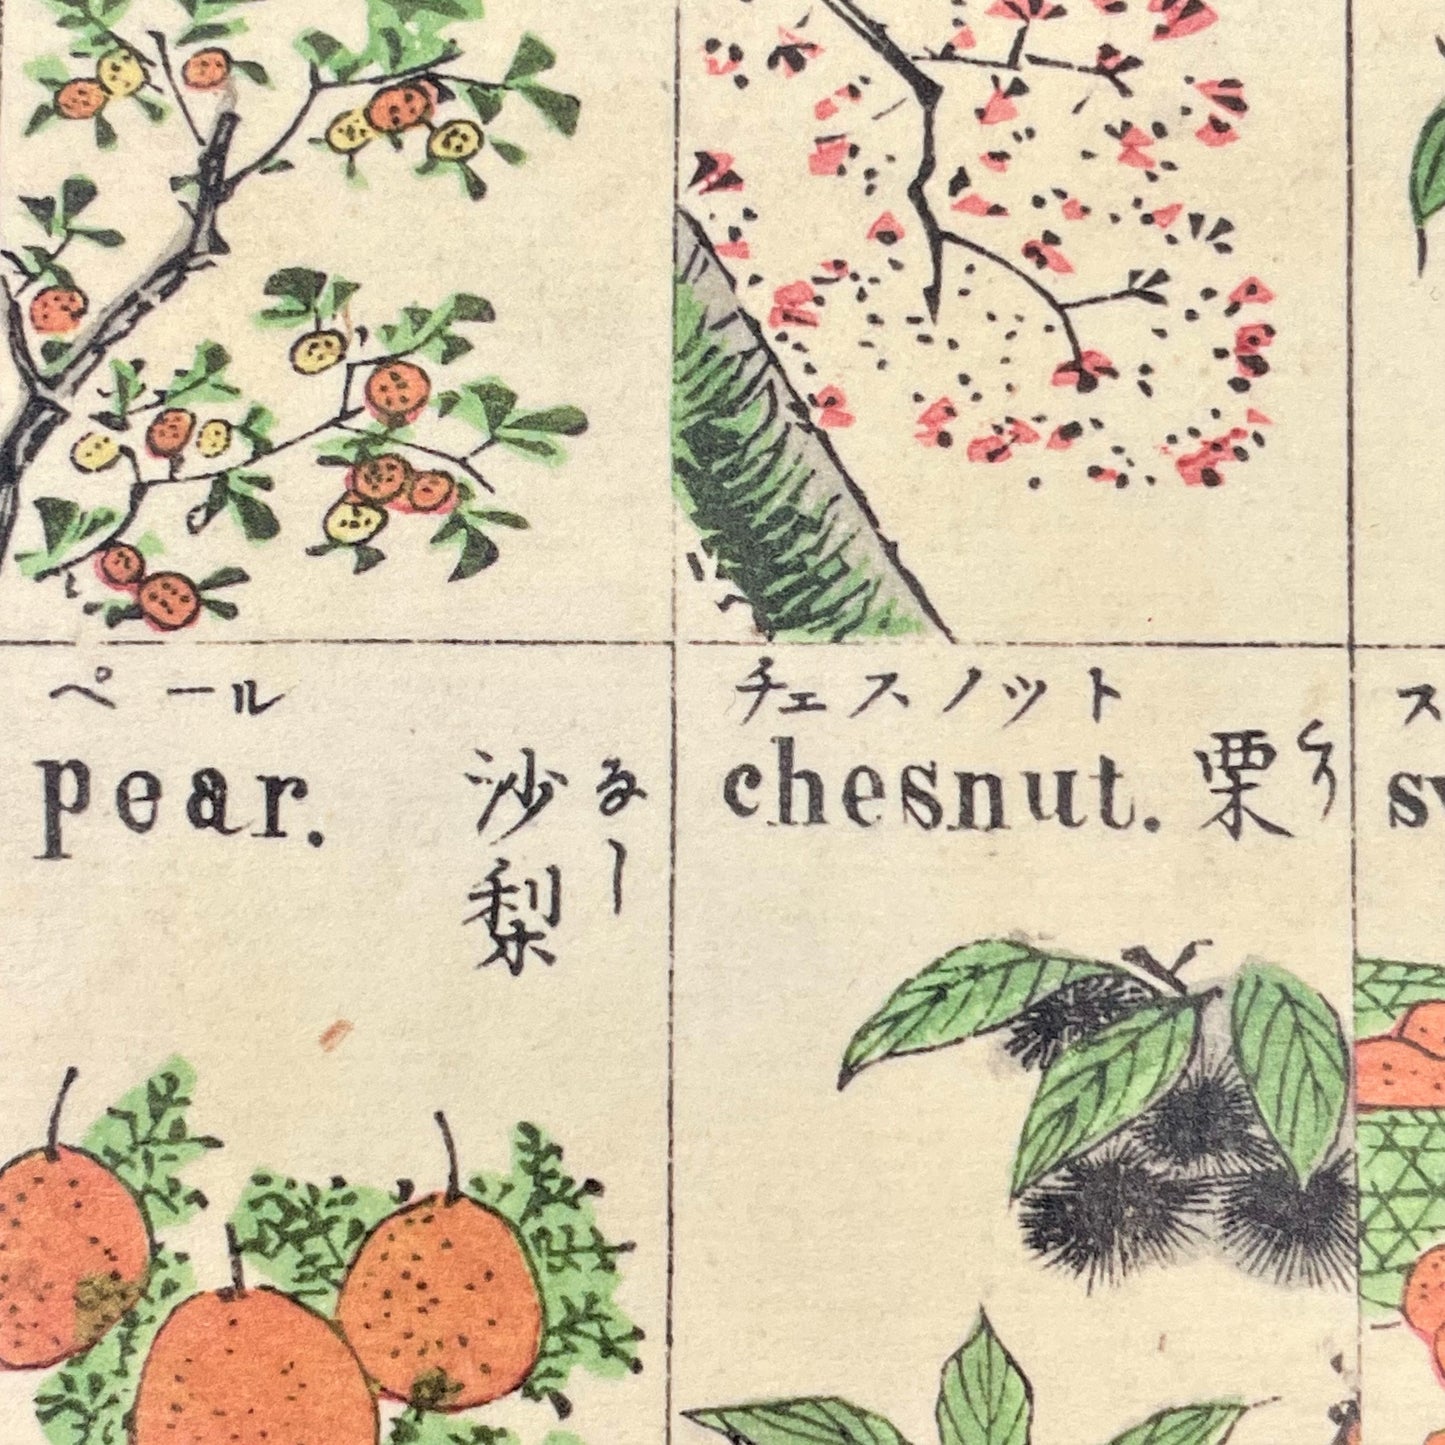 greetings card with drawings of japanese fruits, close-up